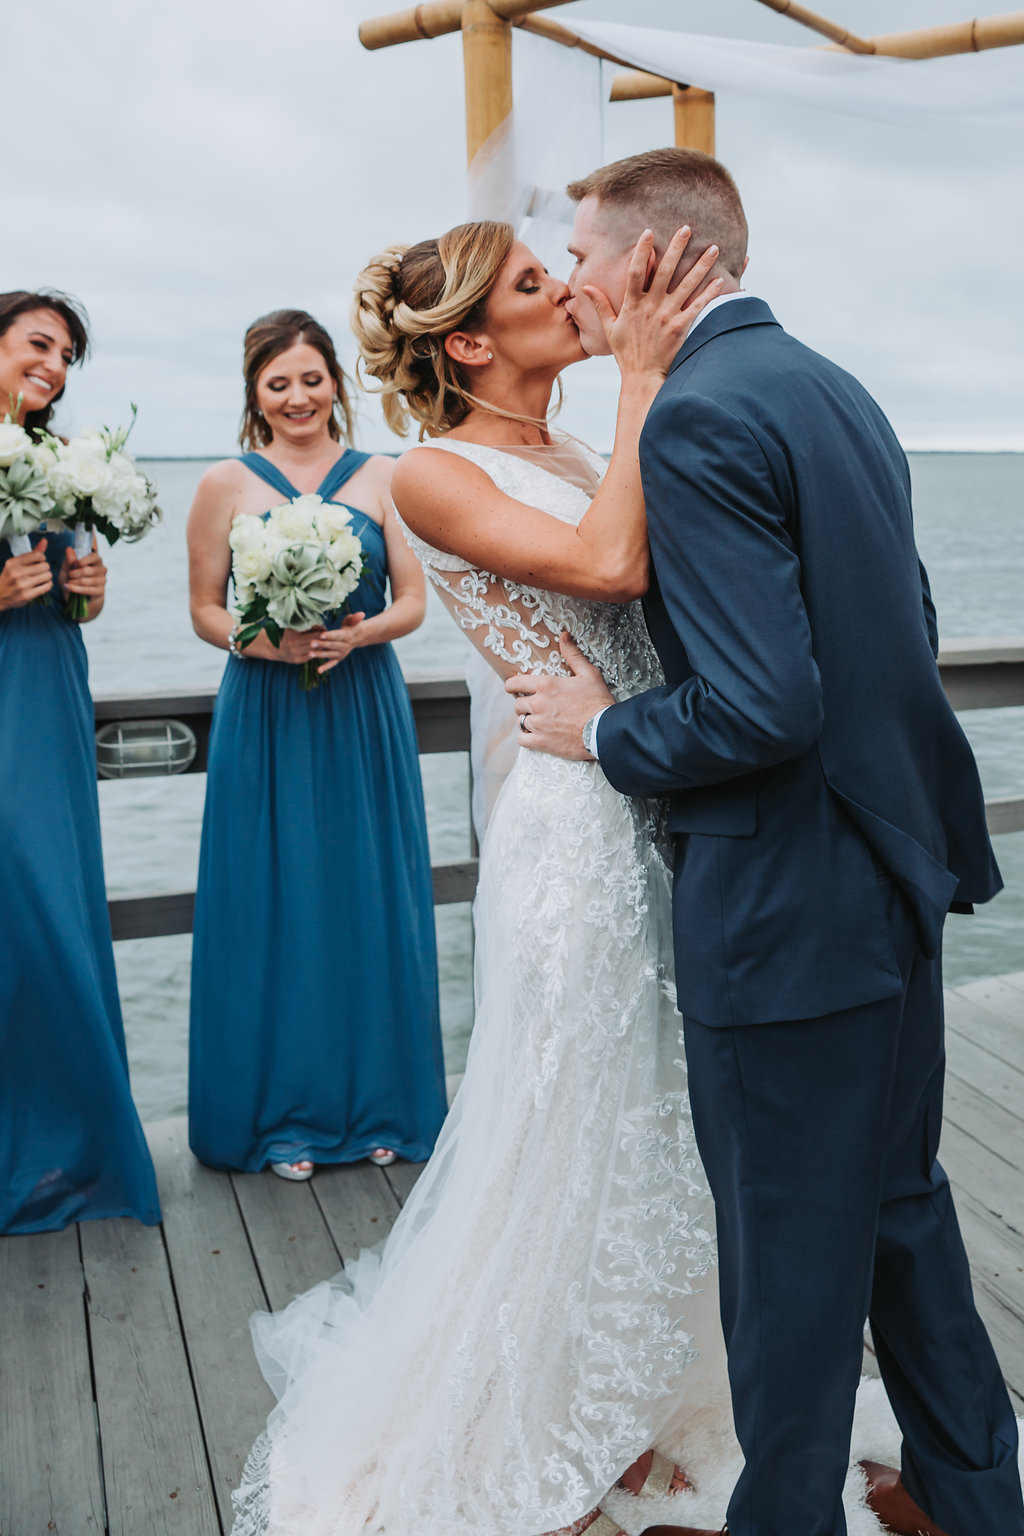 Outdoor Waterfront Wedding Ceremony First Kiss Portrait, Groom in Blue Suit, Bride in Lace Cutout Dress, Bridesmaids in Mismatched Blue Dresses with White and Succulent Greenery Bouquet | Tampa Bay Wedding Photographer Grind and Press Photography